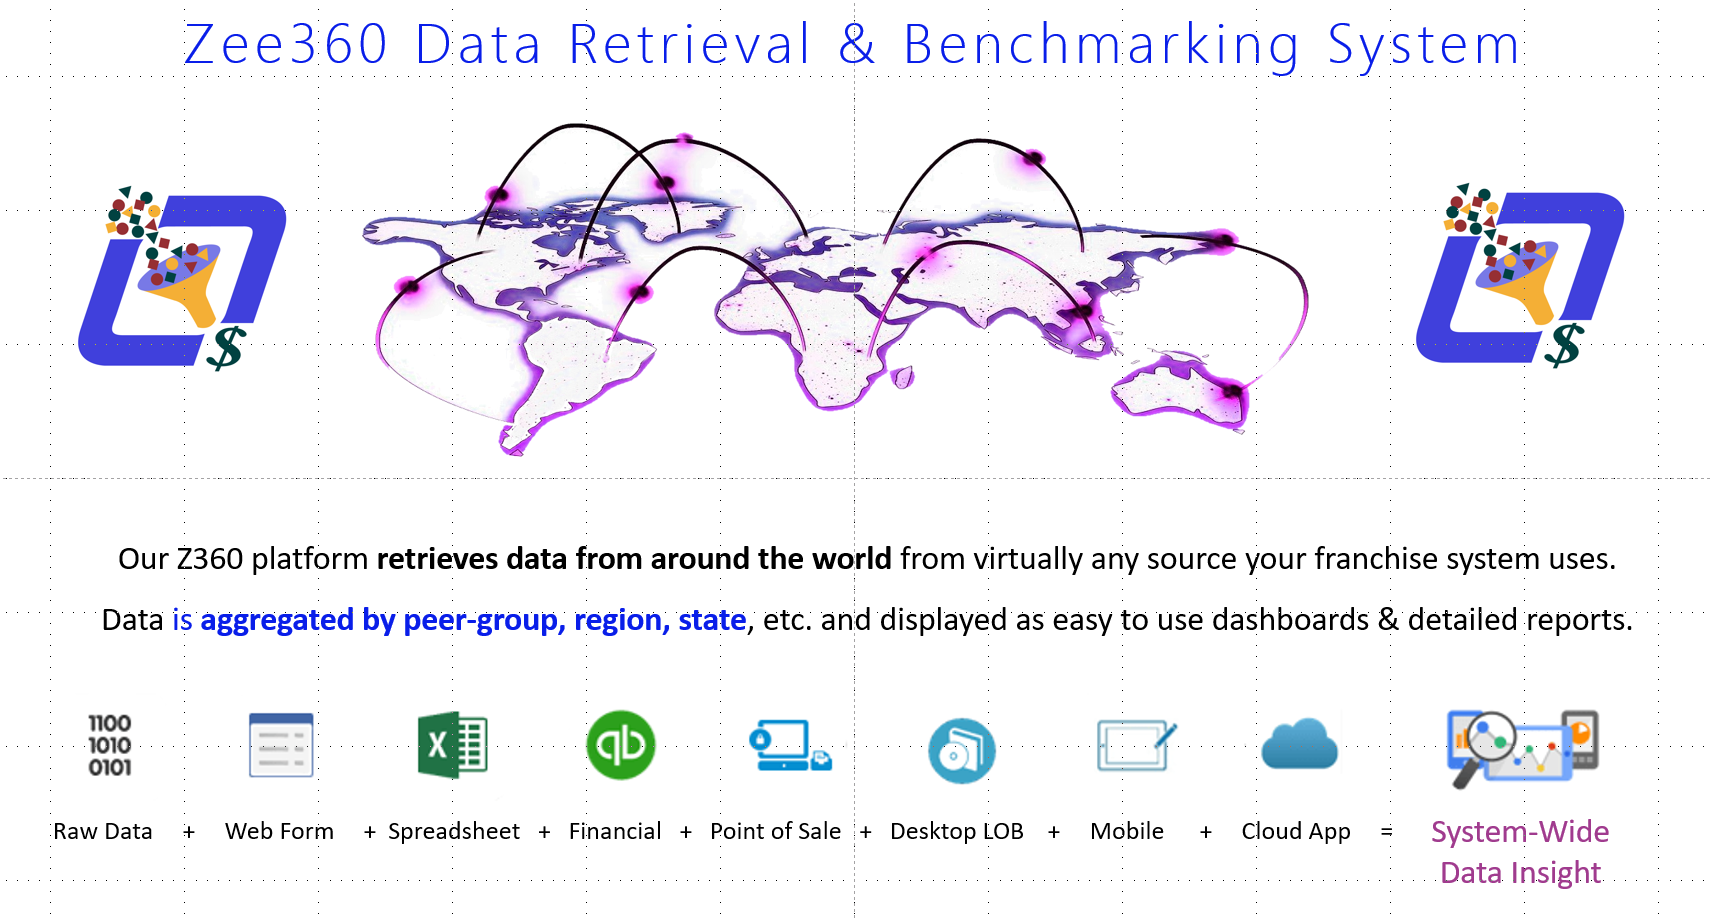 Remote Data Collection & Benchmarking / KPIs